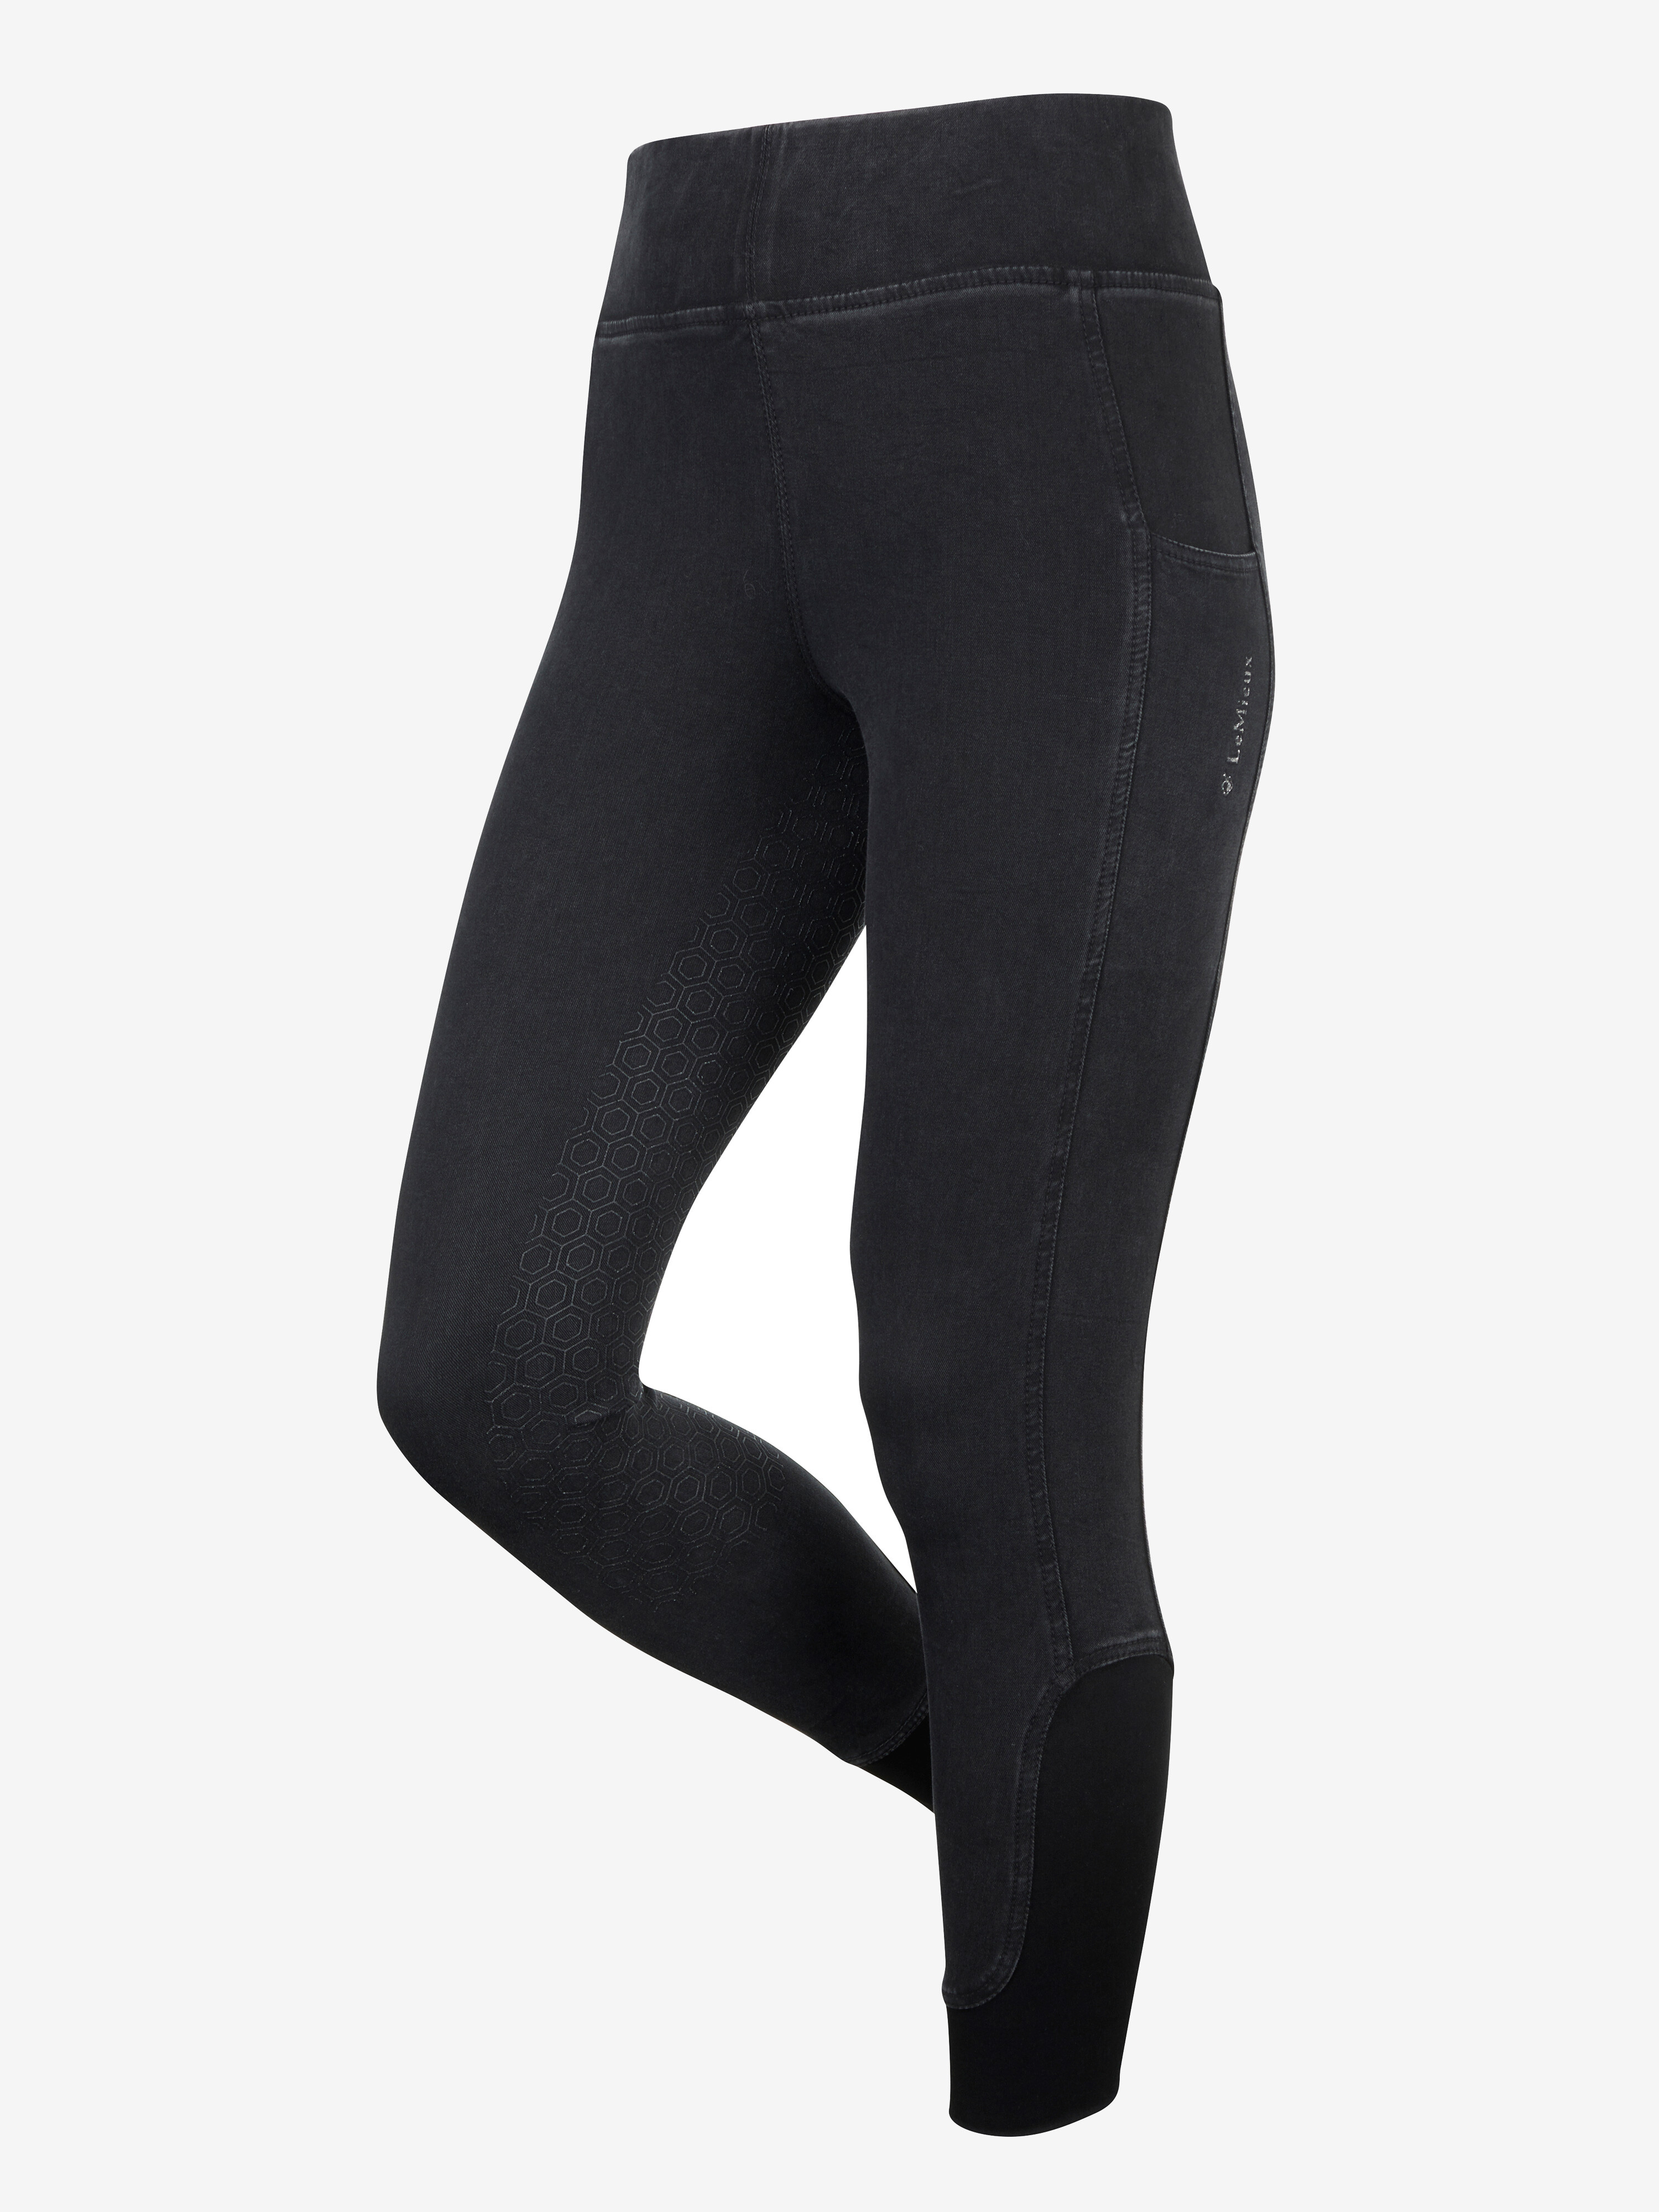 LeMieux Denim Pull On Breeches at On The Bit Tack and Apparel